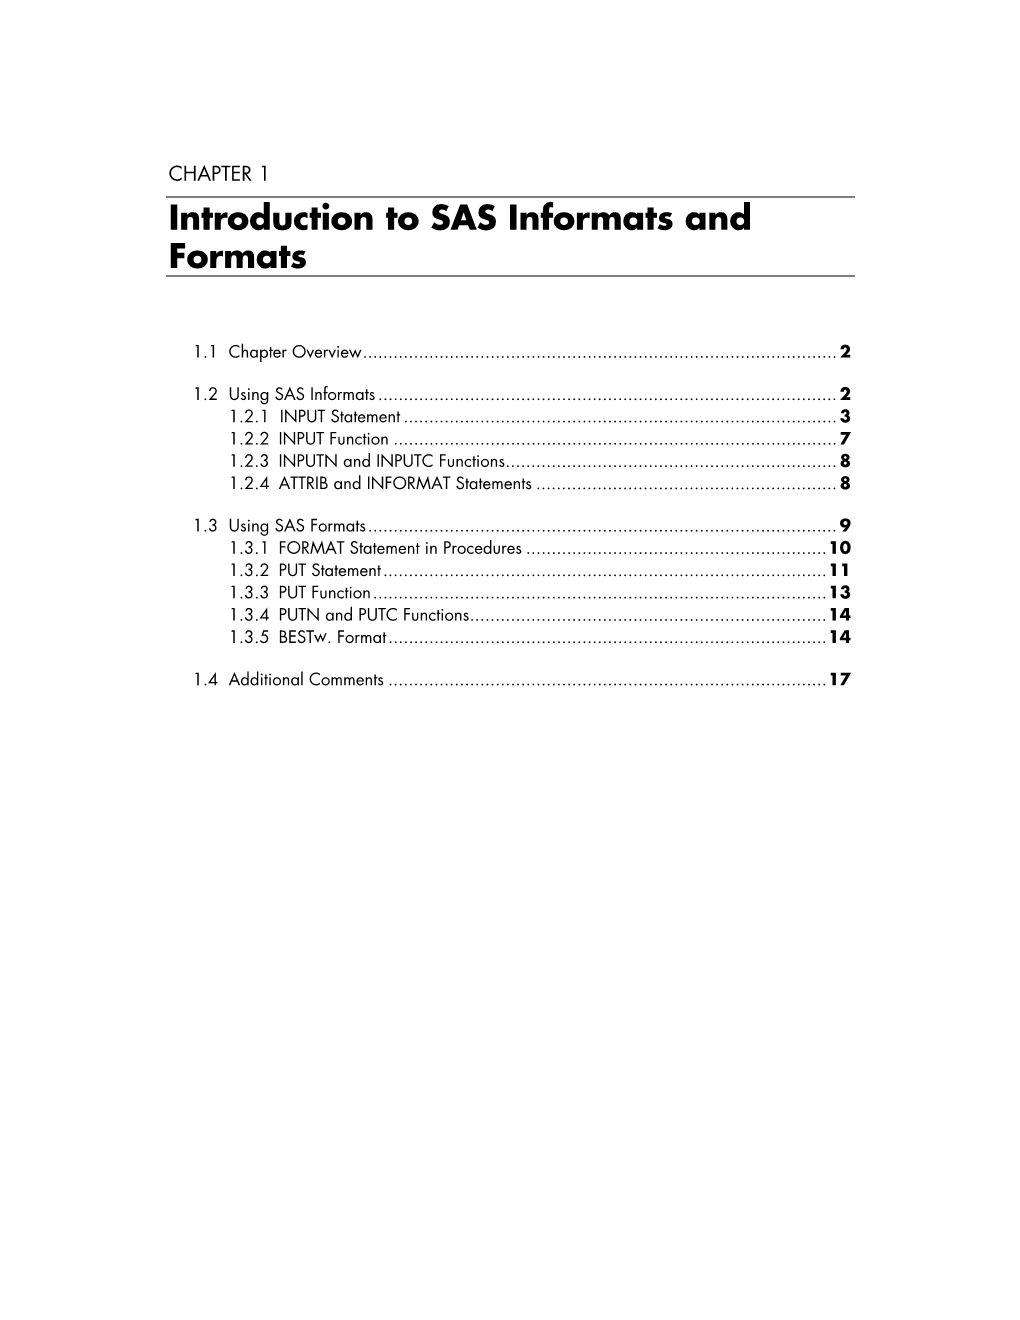 Introduction to SAS Informats and Formats